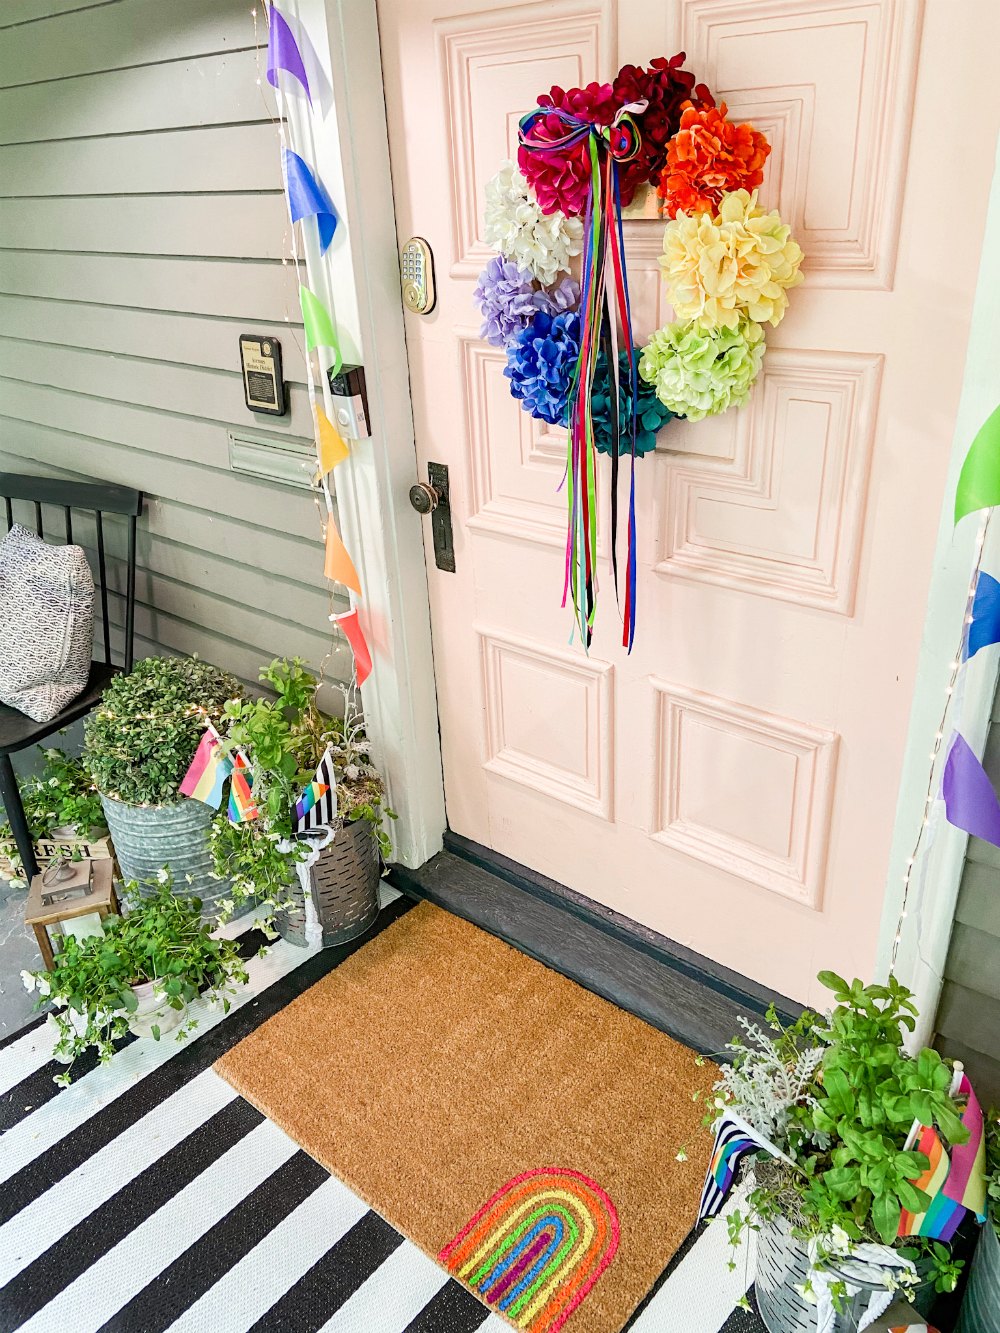 Rainbow Pride Hydrangea Wreath. Celebrate Pride Month and Summer with a colorful and happy rainbow flower wreath! 